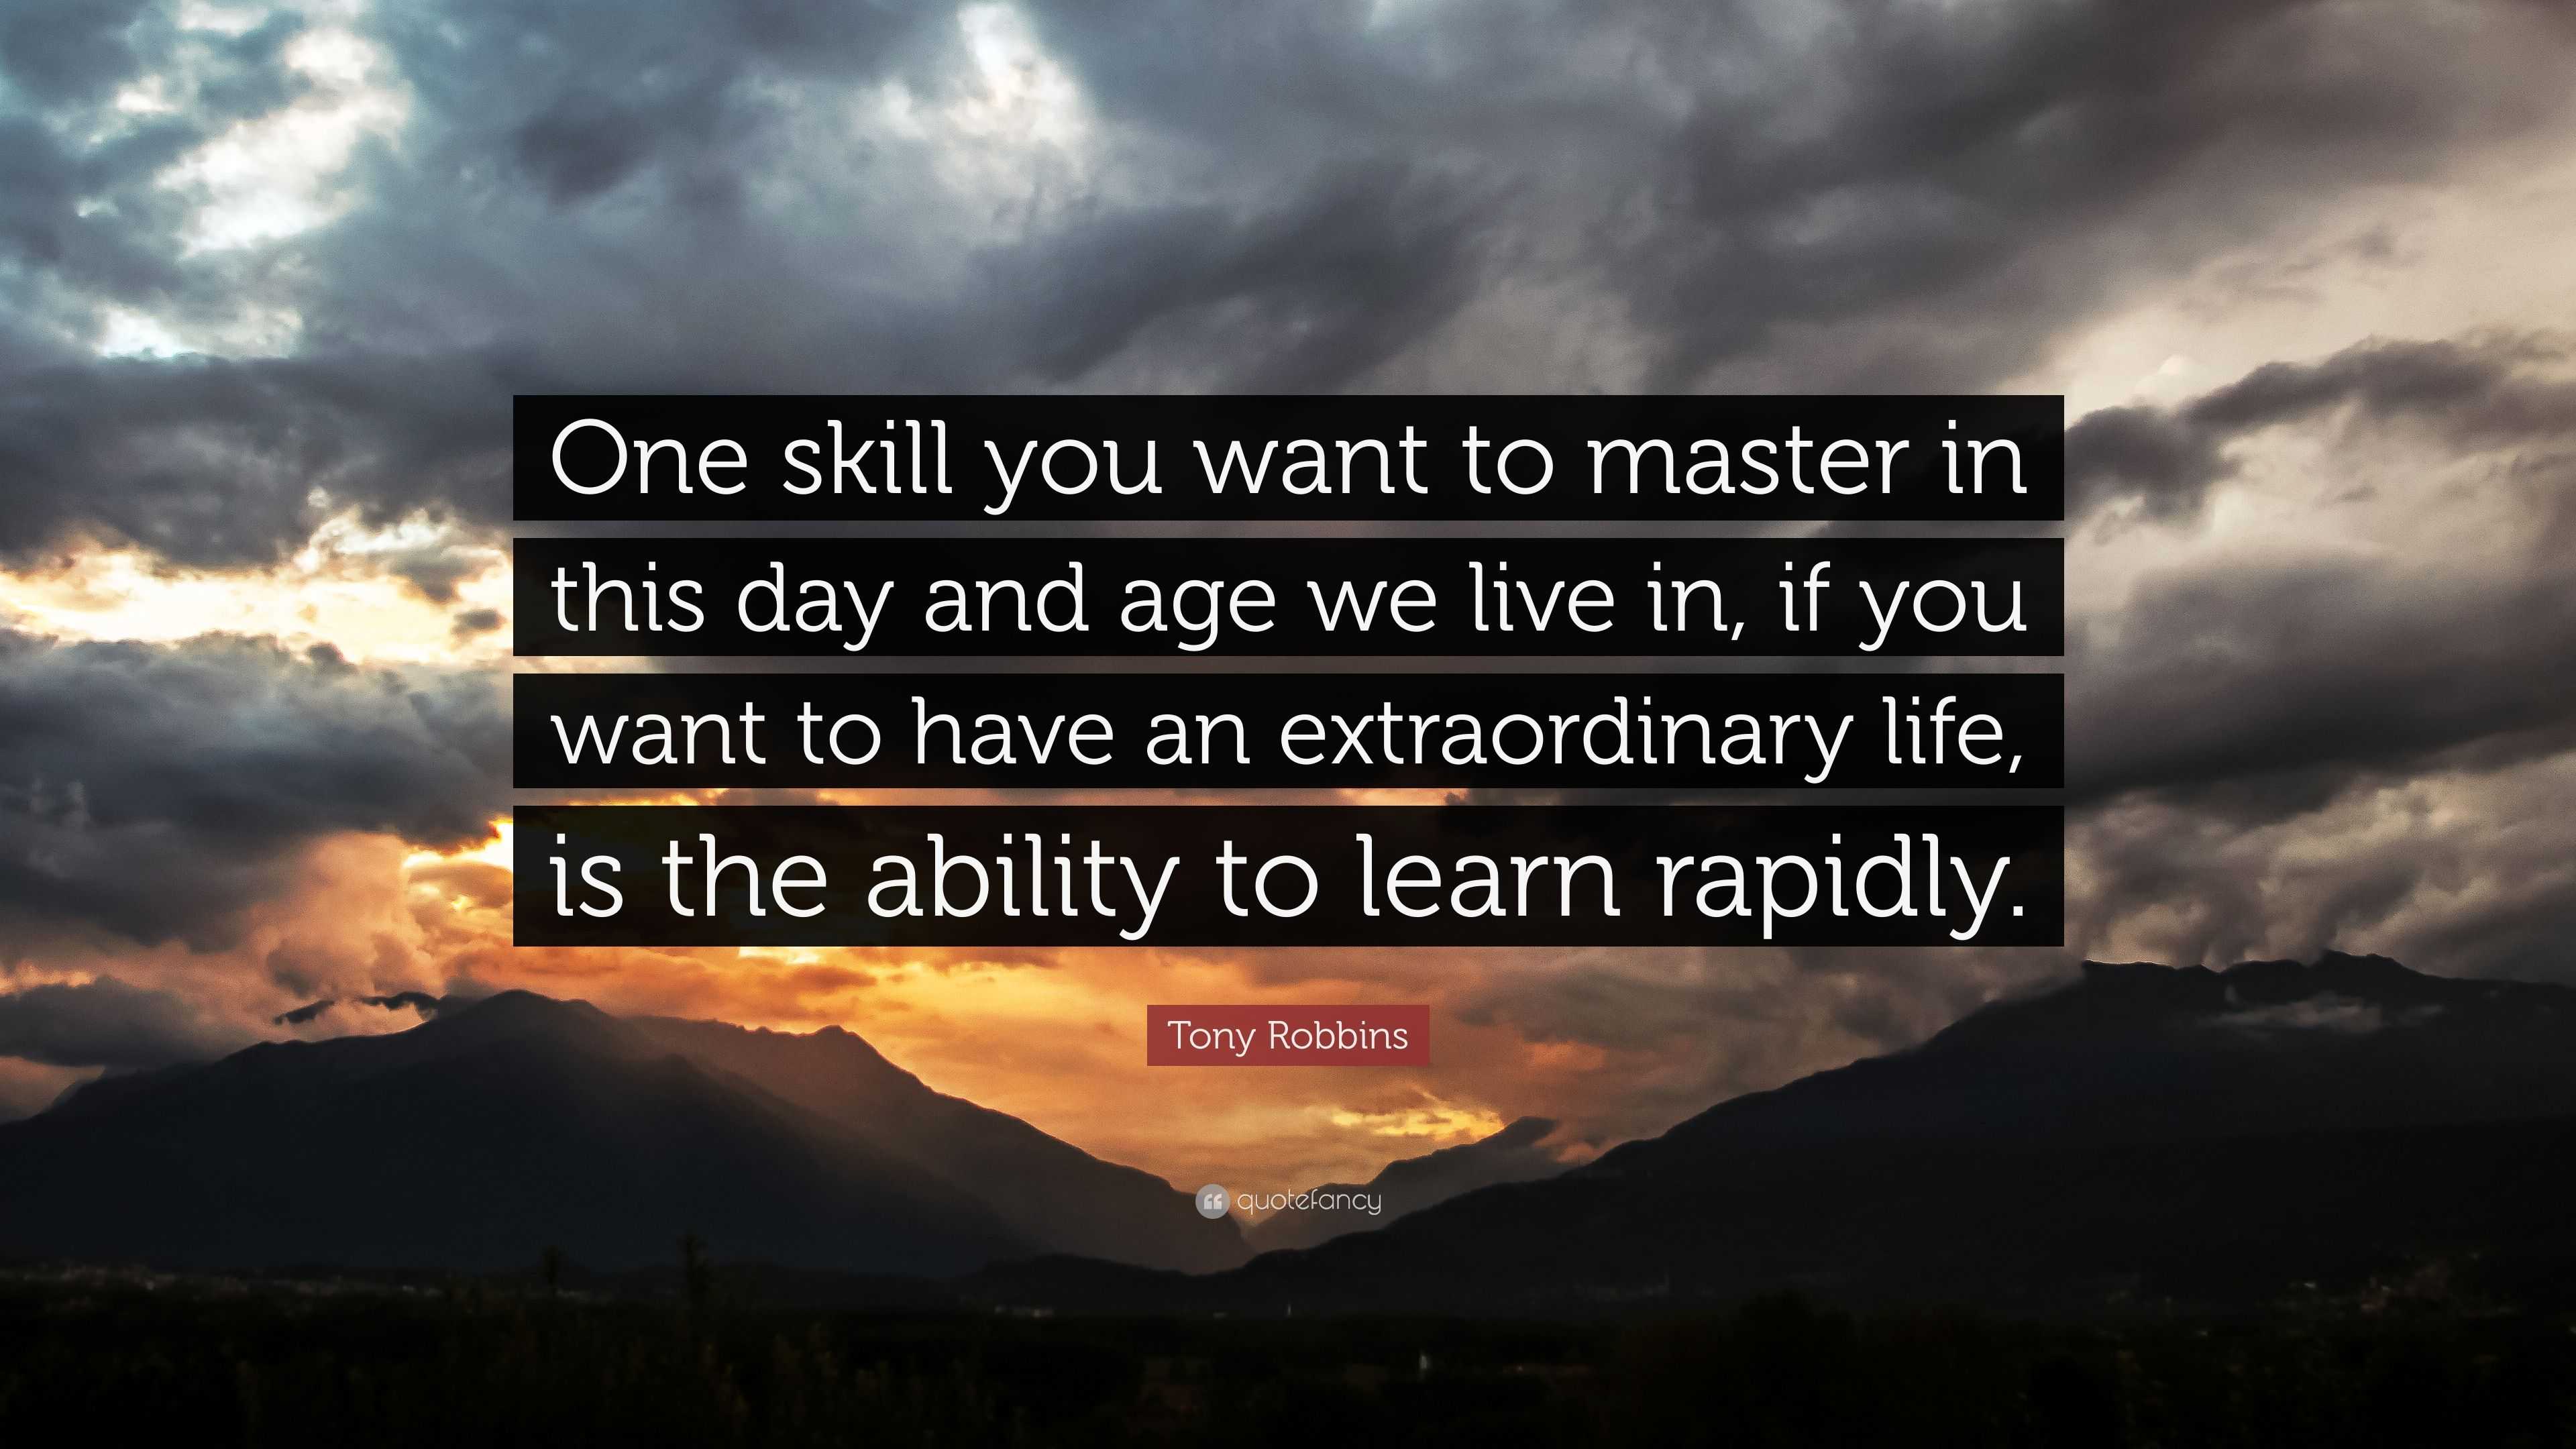 Tony Robbins Quote “ e skill you want to master in this day and age